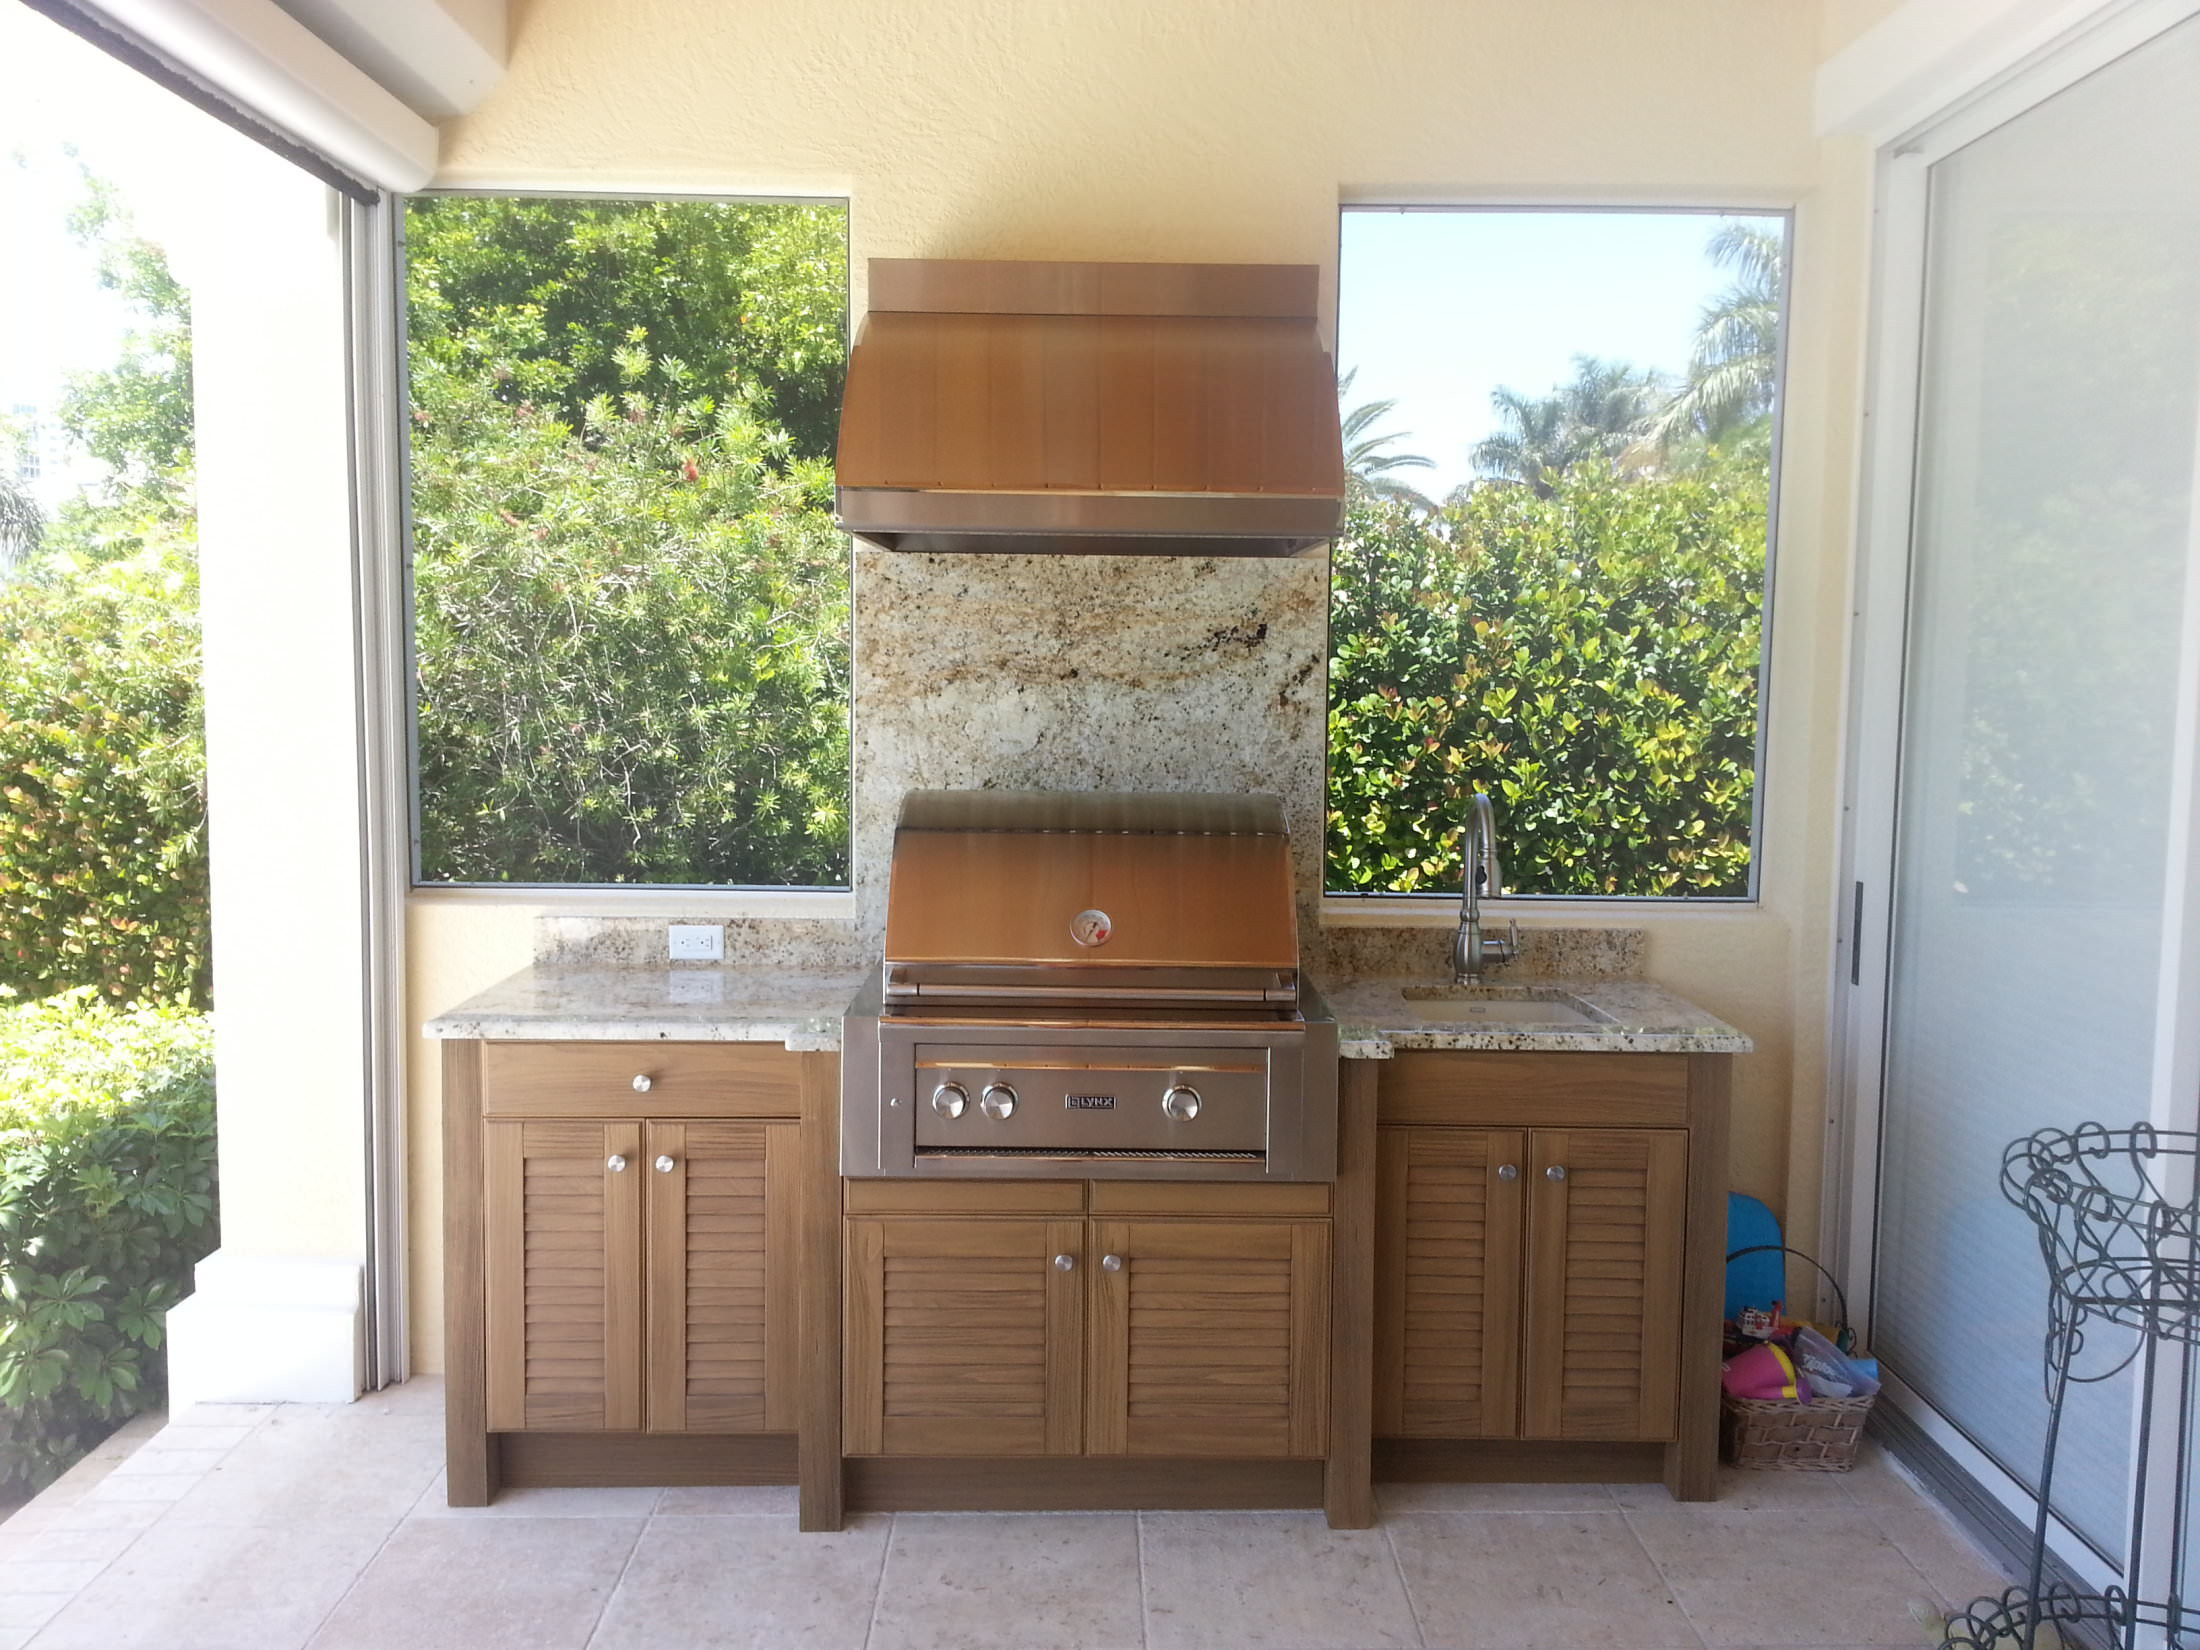 Chadwick Outdoor Kitchens
 Simulated Wood – Chadwick Outdoor Kitchens